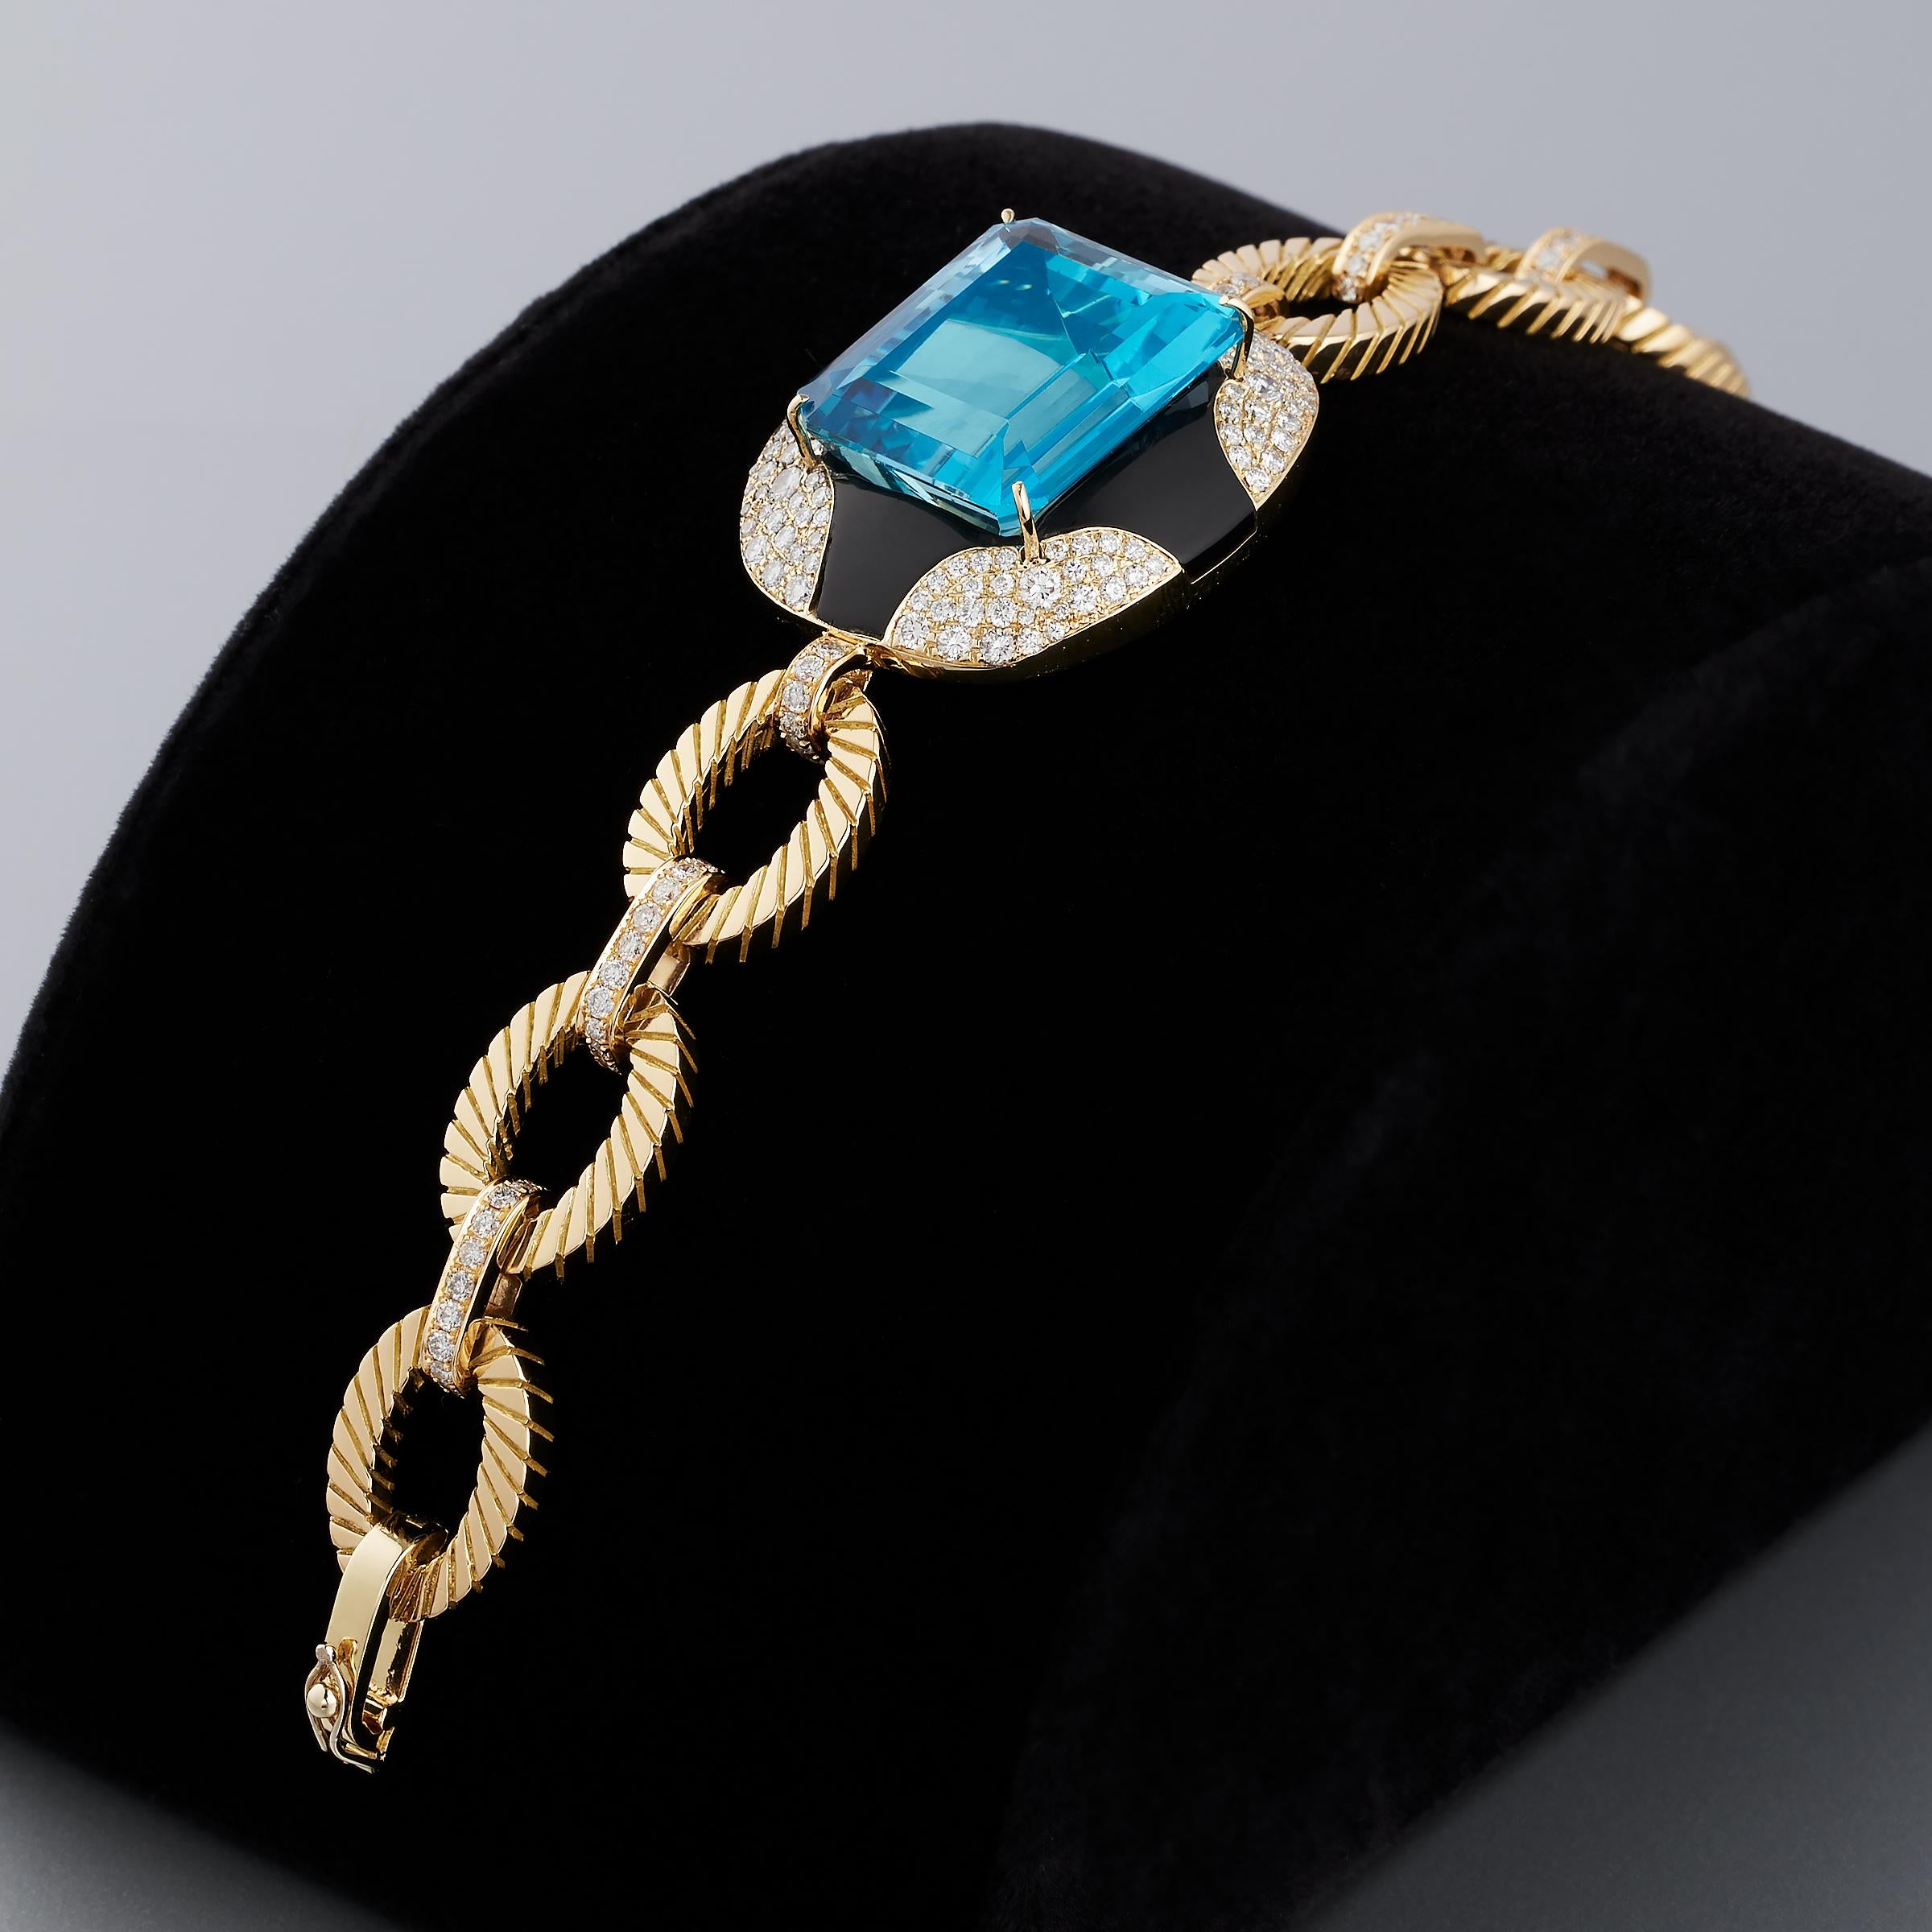 Exceptional one-of-a-kind large aquamarine diamond and black onyx bracelet attributed to Mauboussin Paris and set in 18 karat yellow gold. This impressive bracelet is a vintage creation dating to 1980s and is emblematic of the bold French